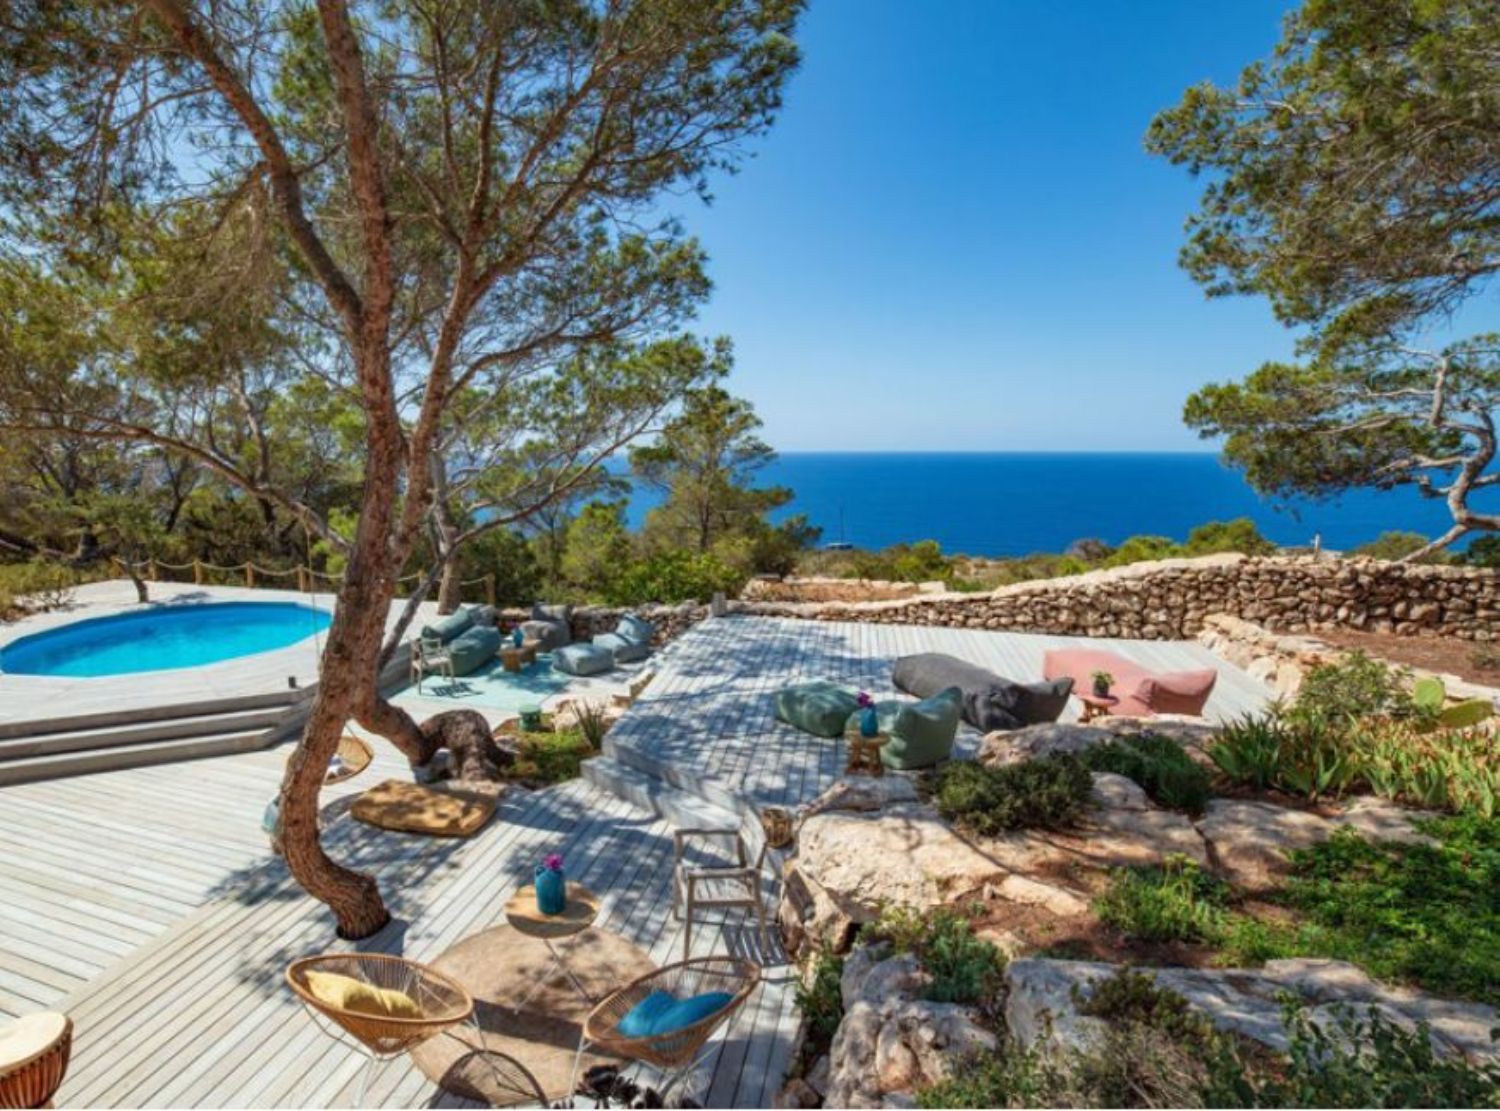 House for sale on the seafront in Pilar de la Mola, in Formentera